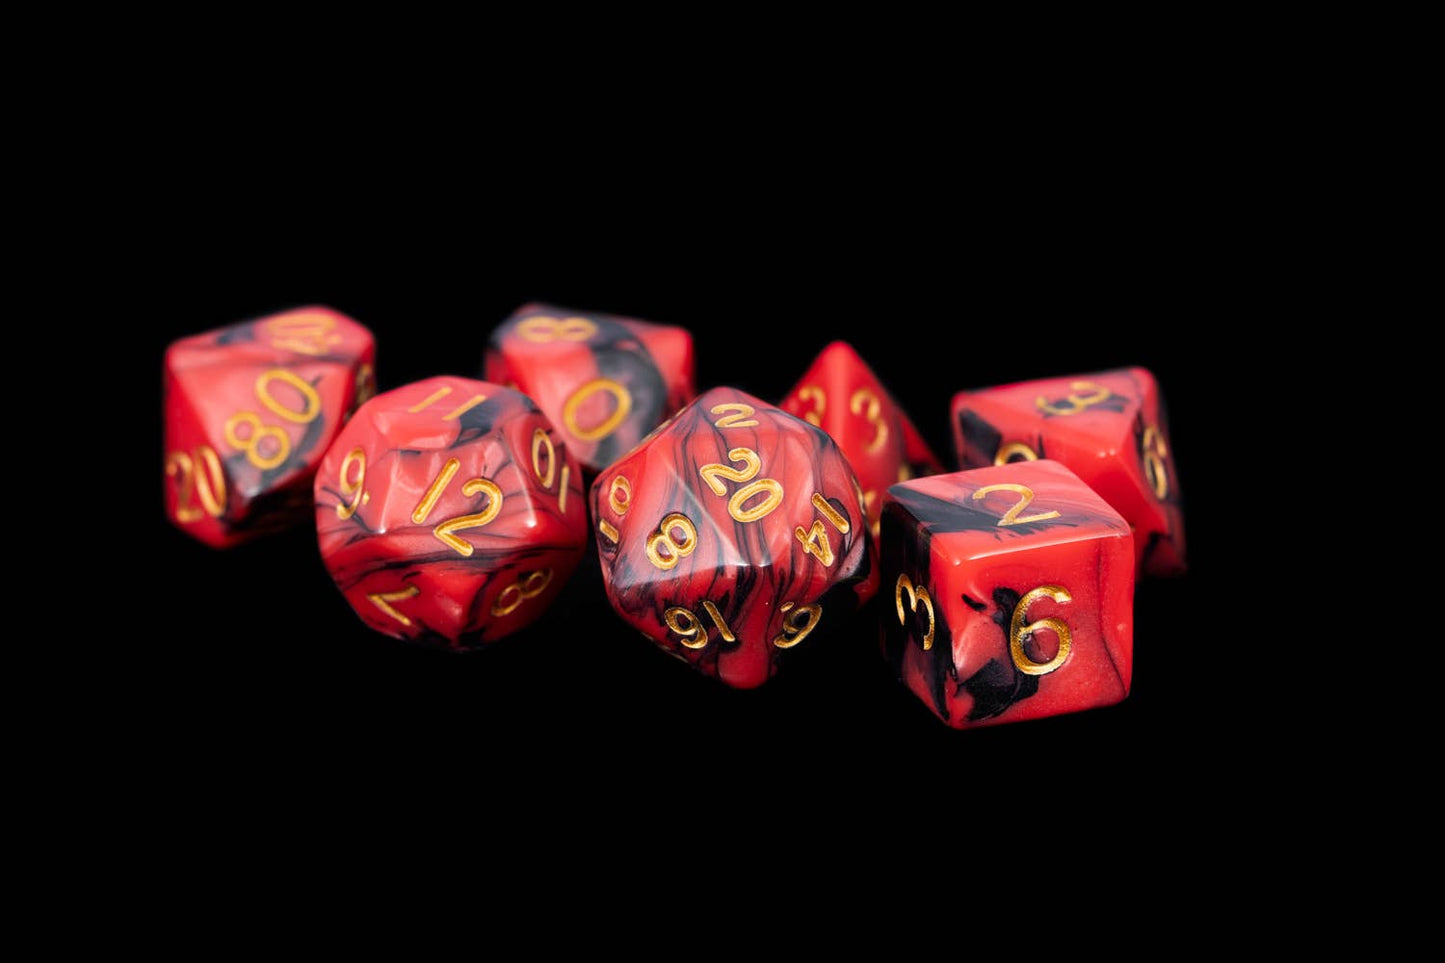 Acrylic Dice Set - Red and Black with Gold Numbers